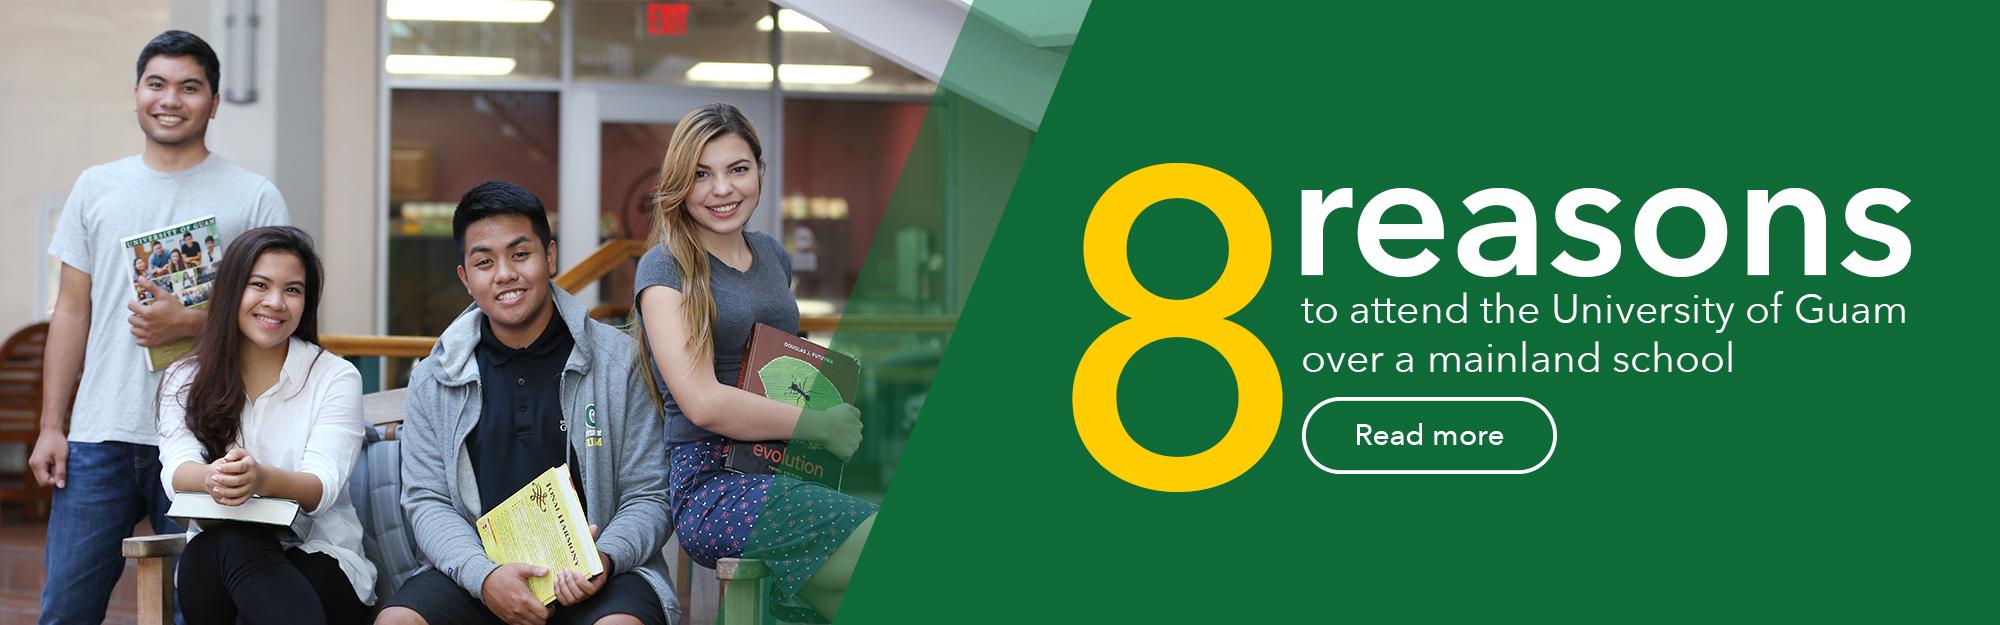 8 reasons to attend UOG over a mainland school